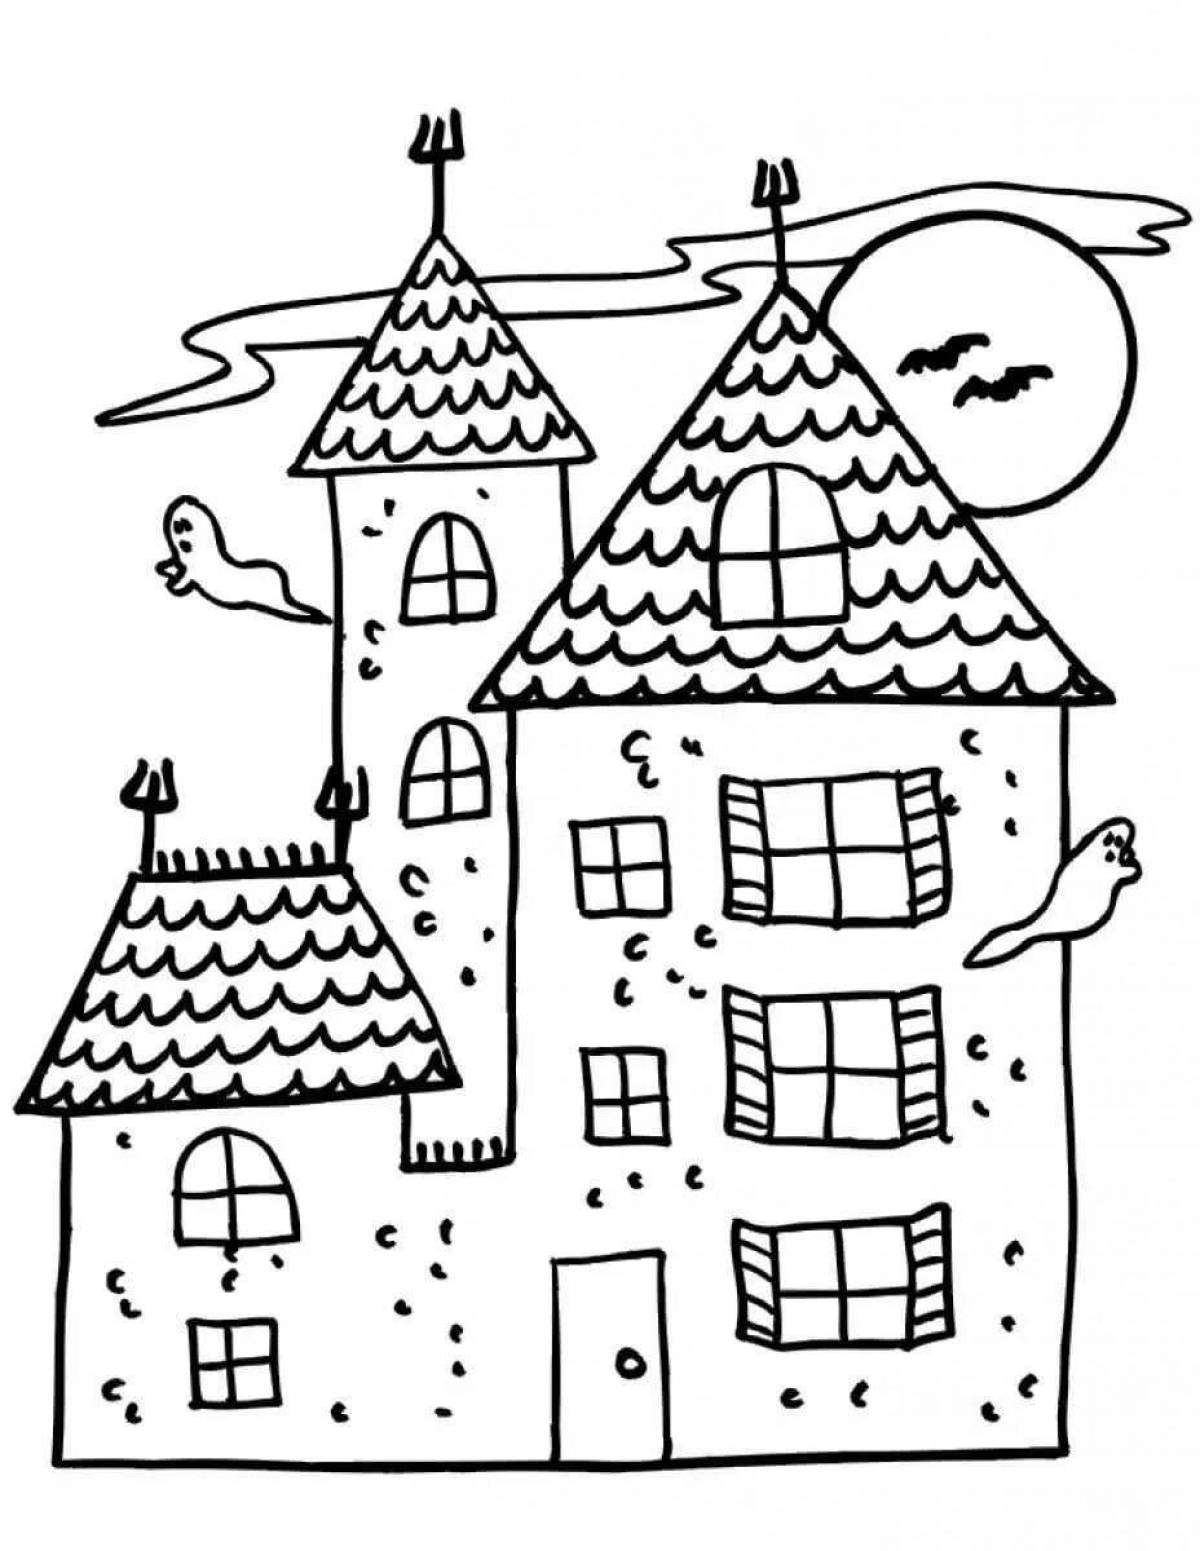 Drawing of a bright house